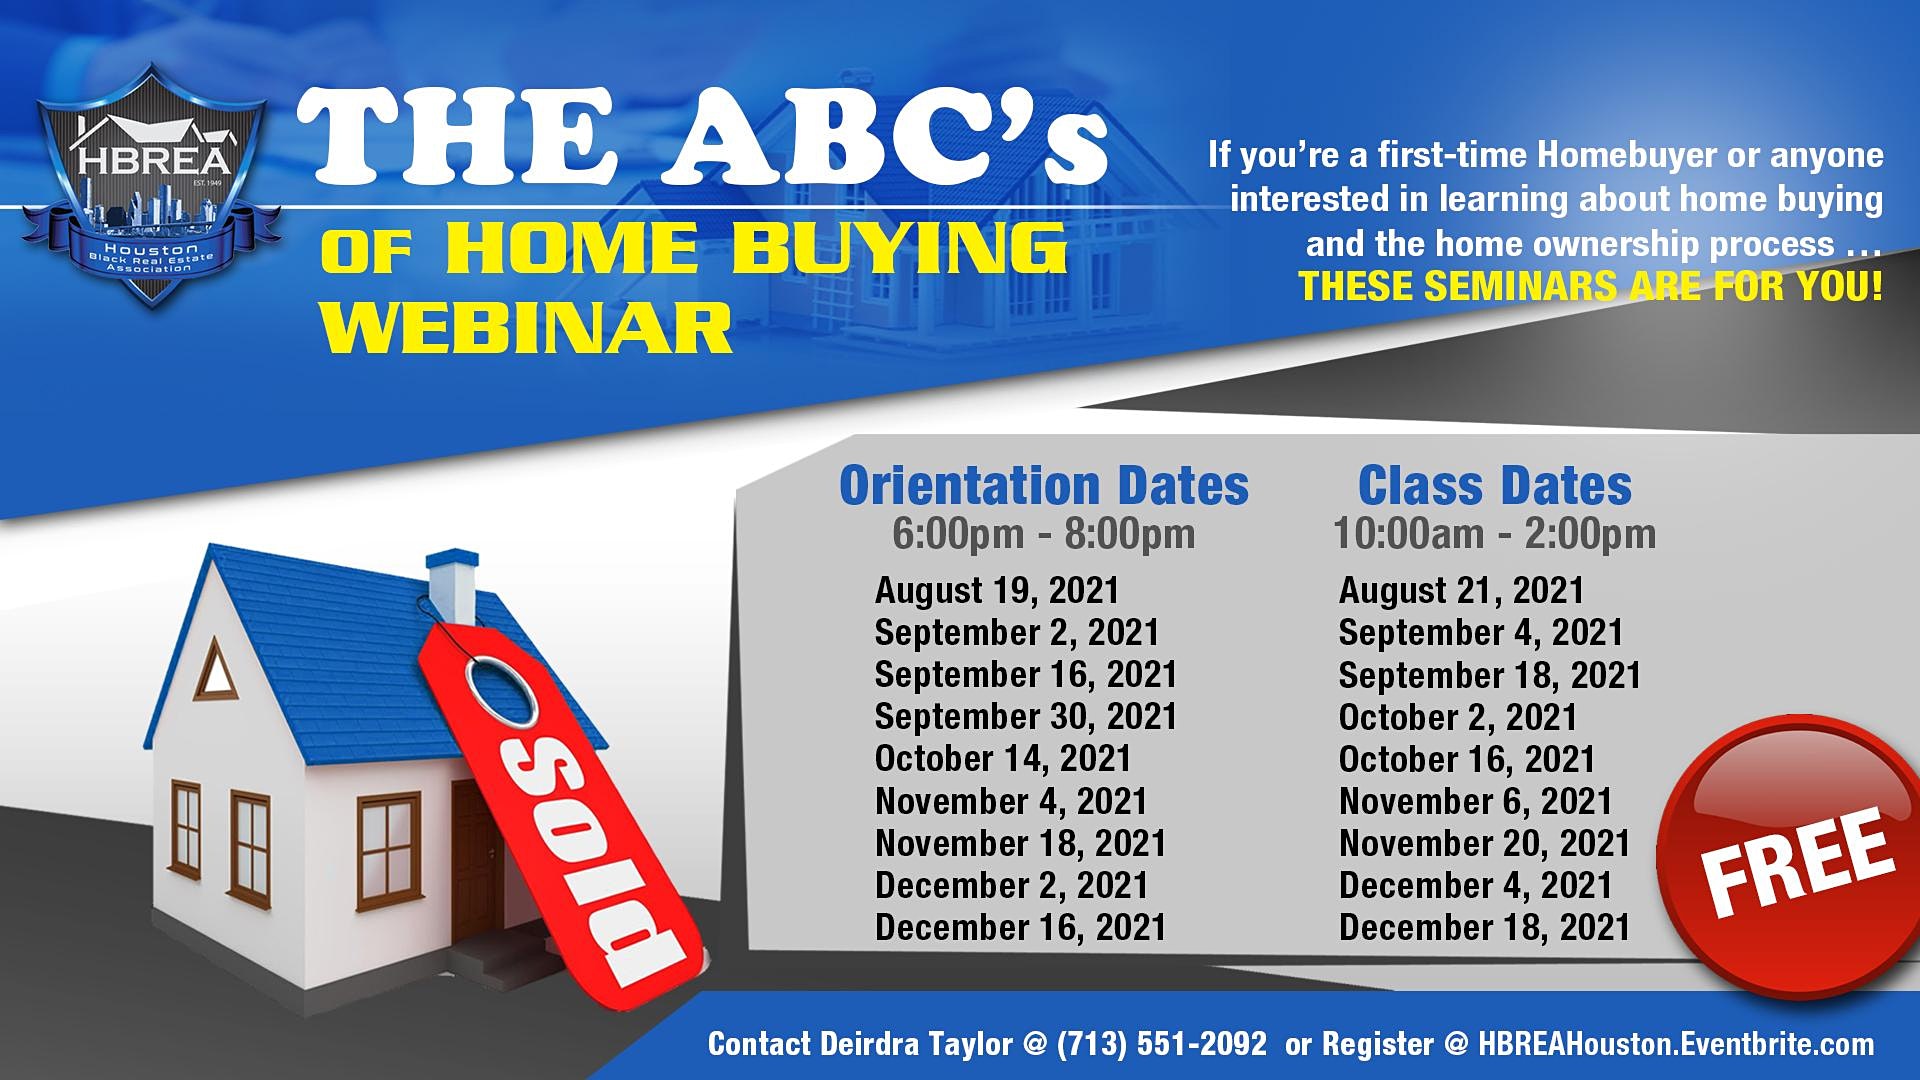 The ABC's of Home Buying